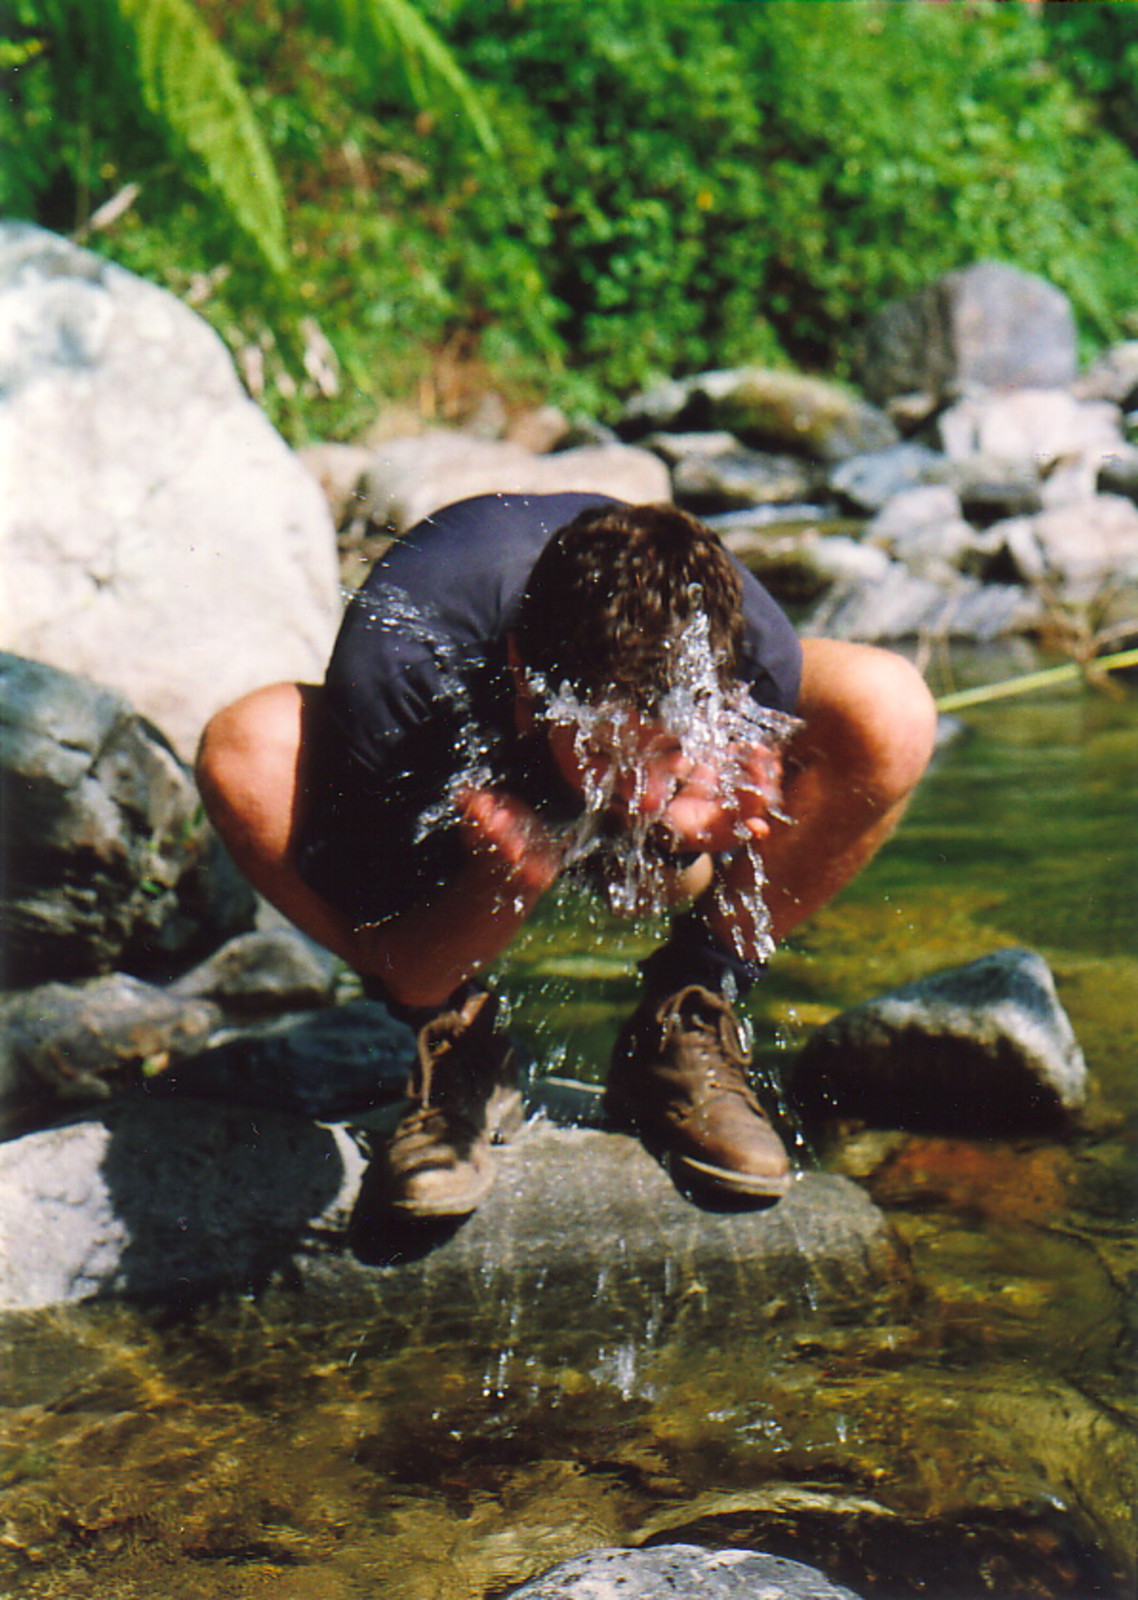 Mark washing in a river